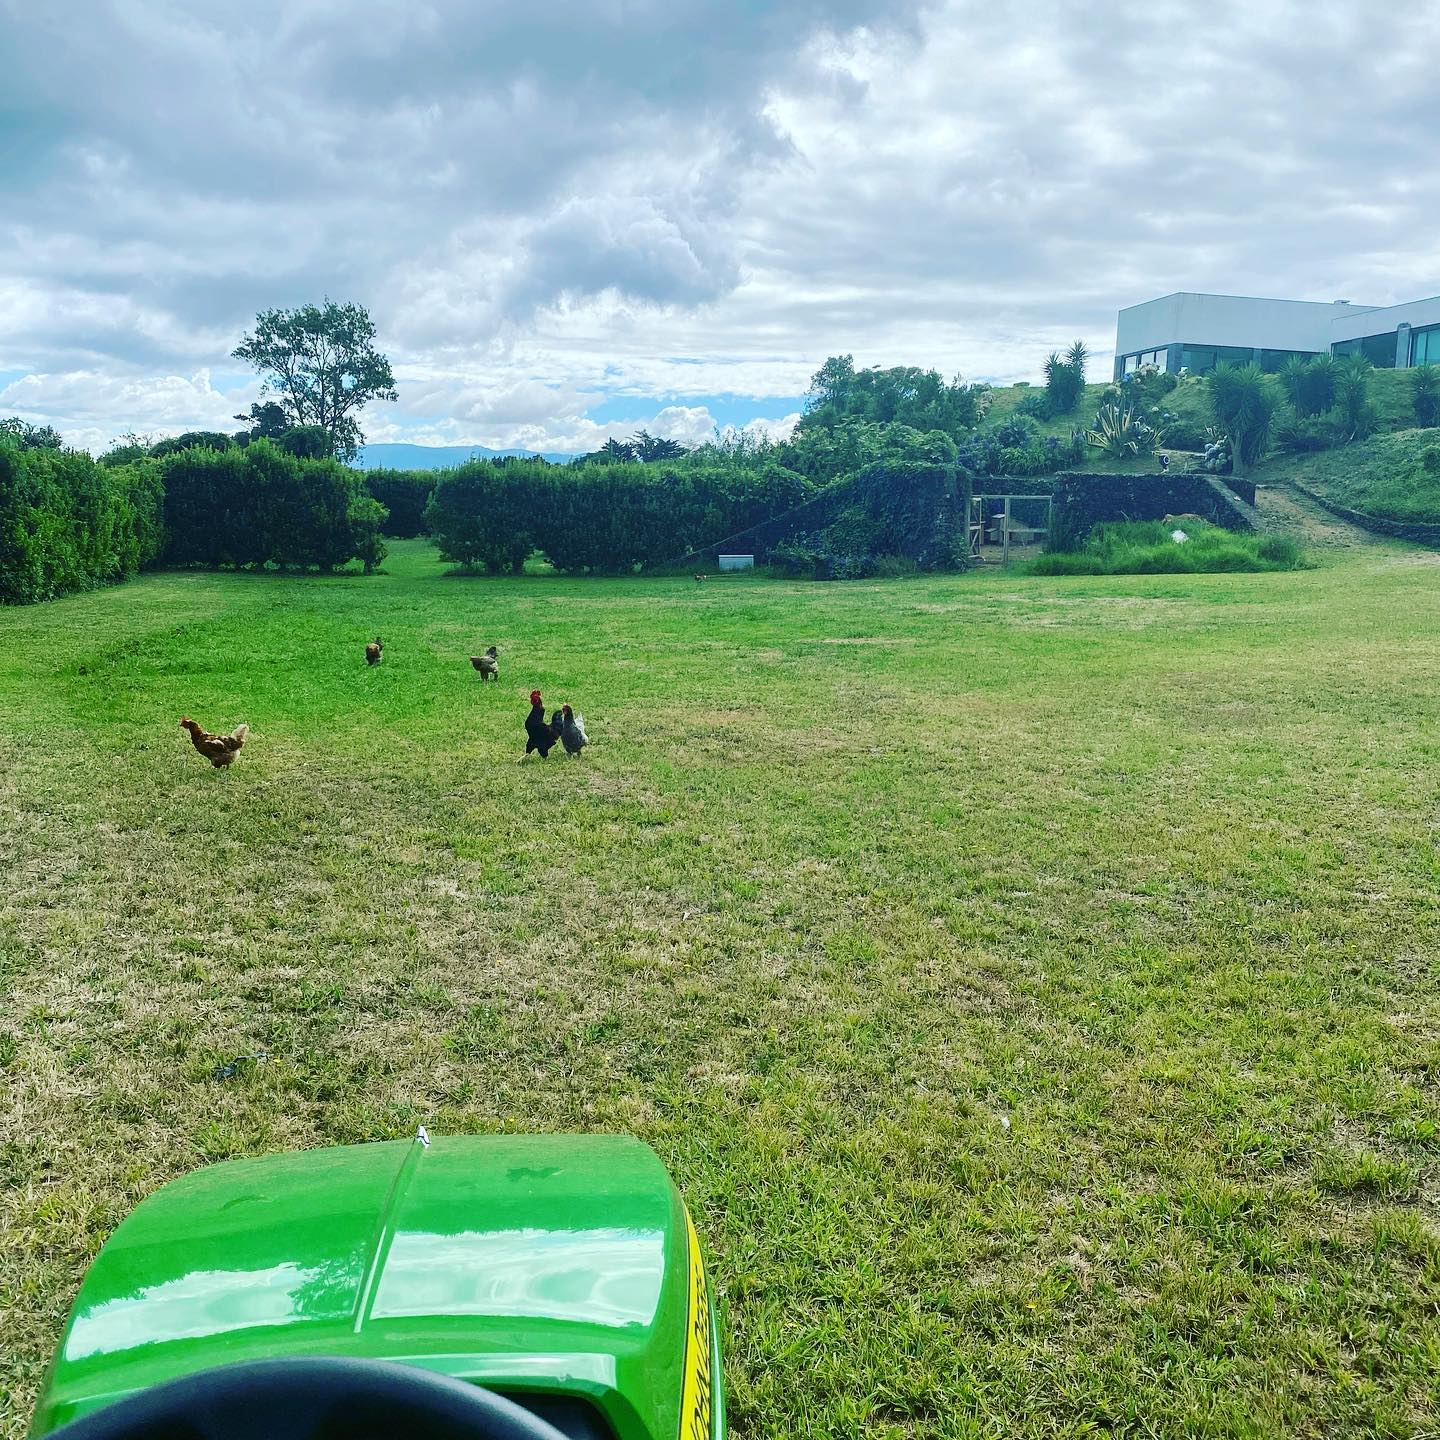 Mowing the lawn 🚜